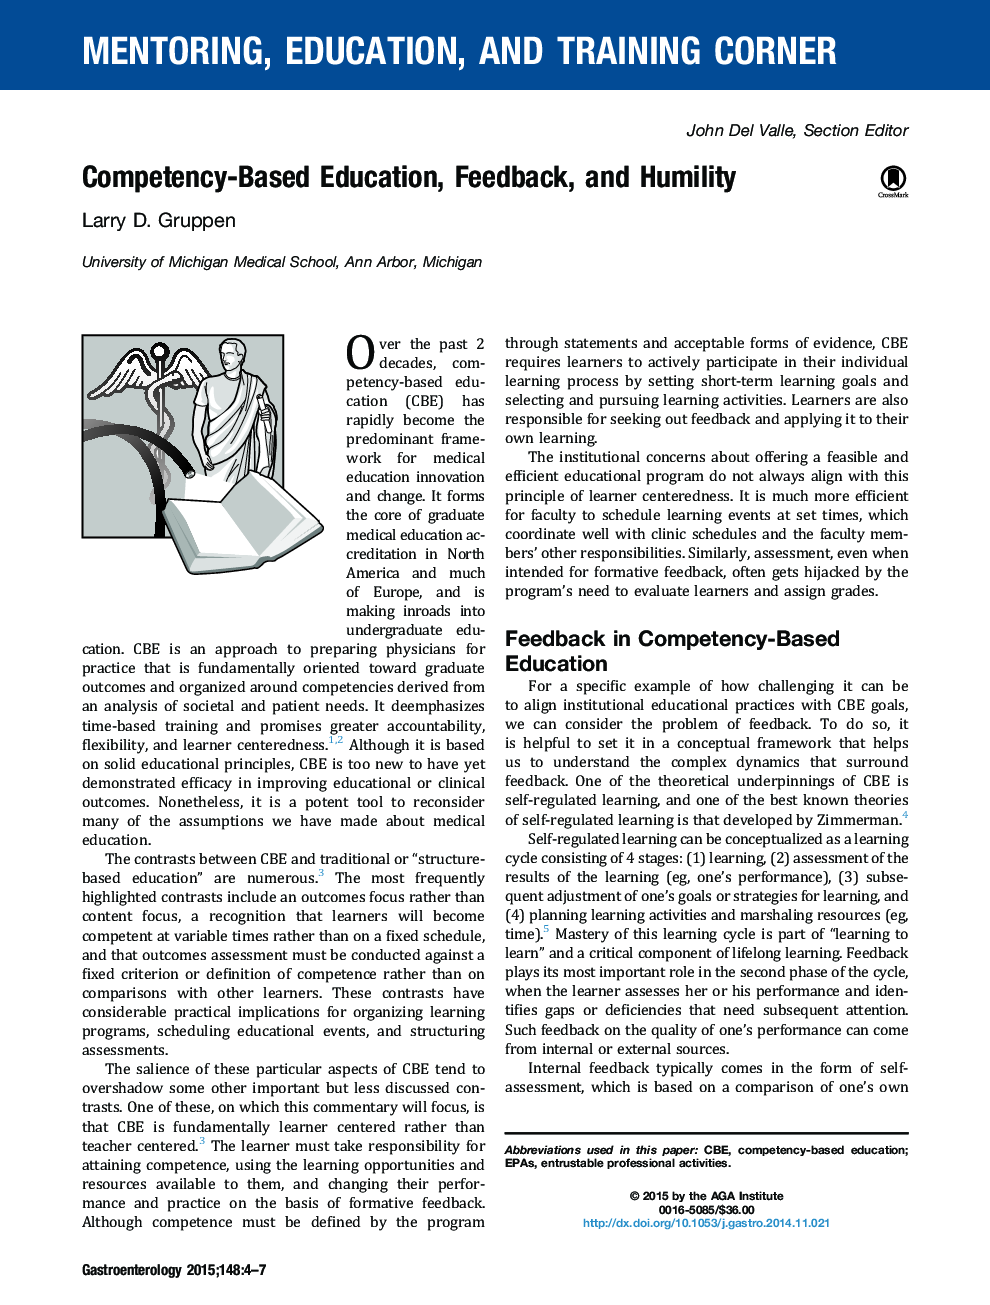 Competency-Based Education, Feedback, and Humility